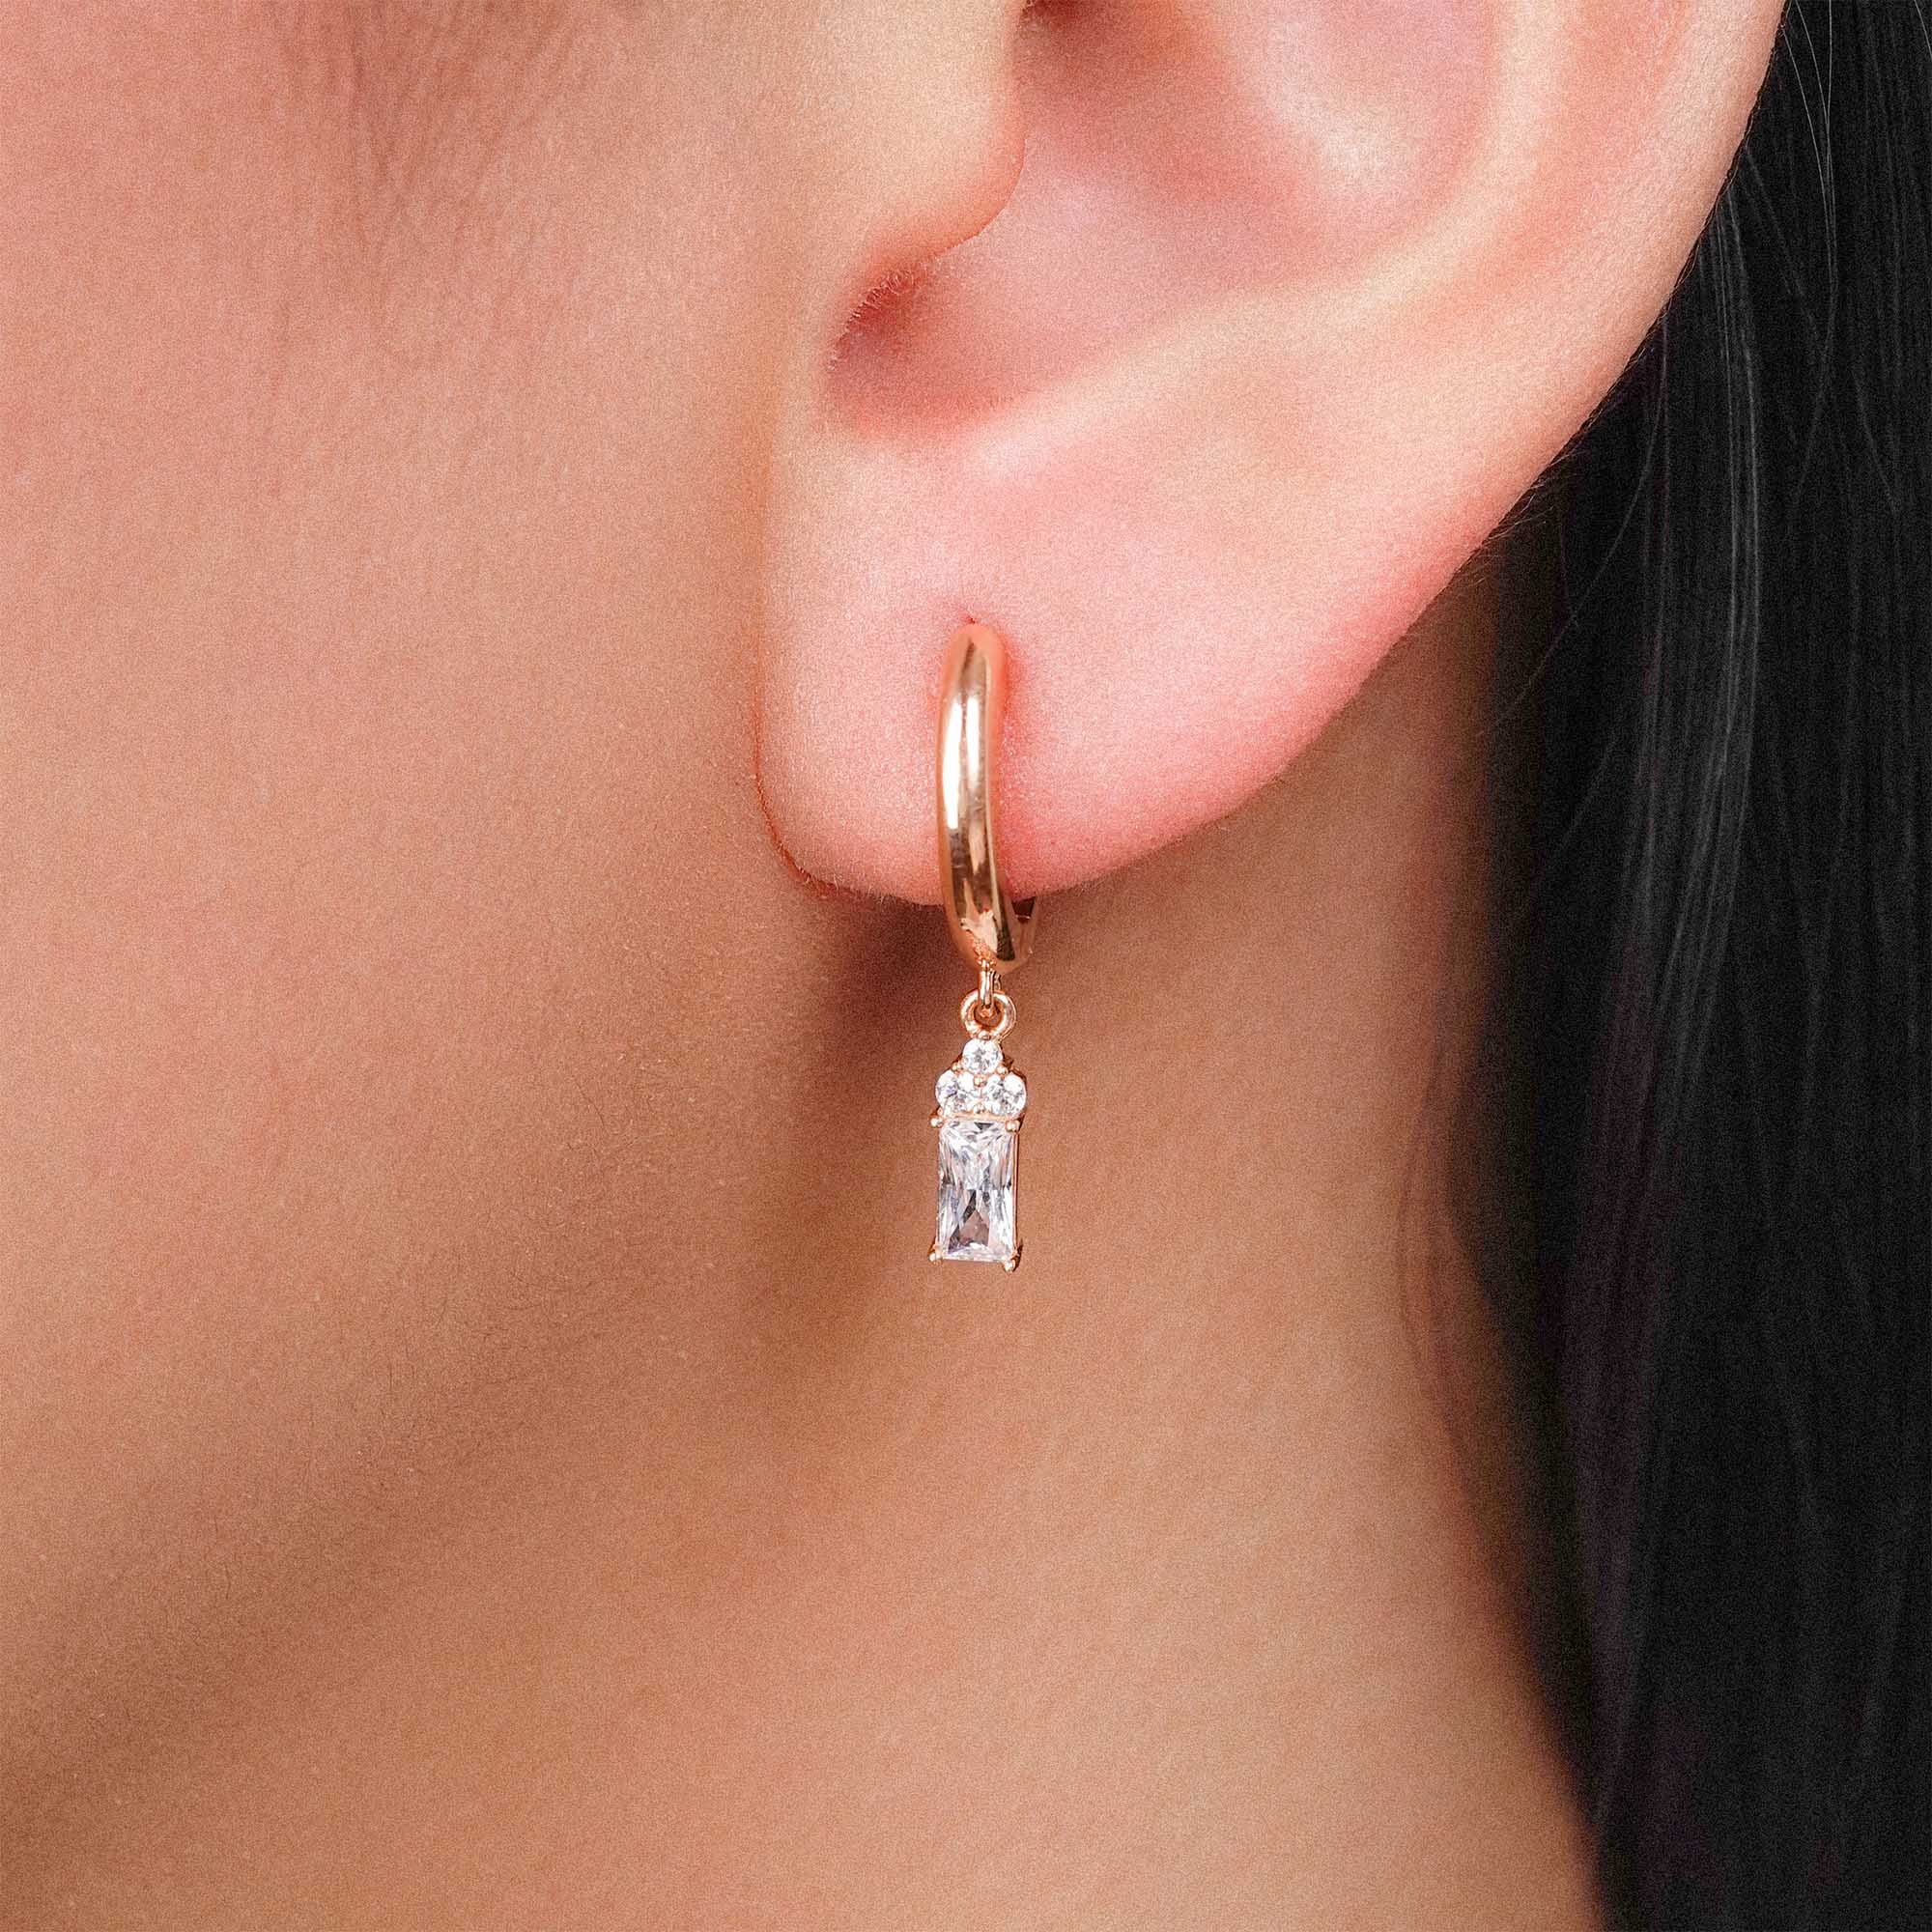 Anting Hoops Emas 7k - Nora Gold Hoops Earring - Quadra Collection - Juene Jewelry